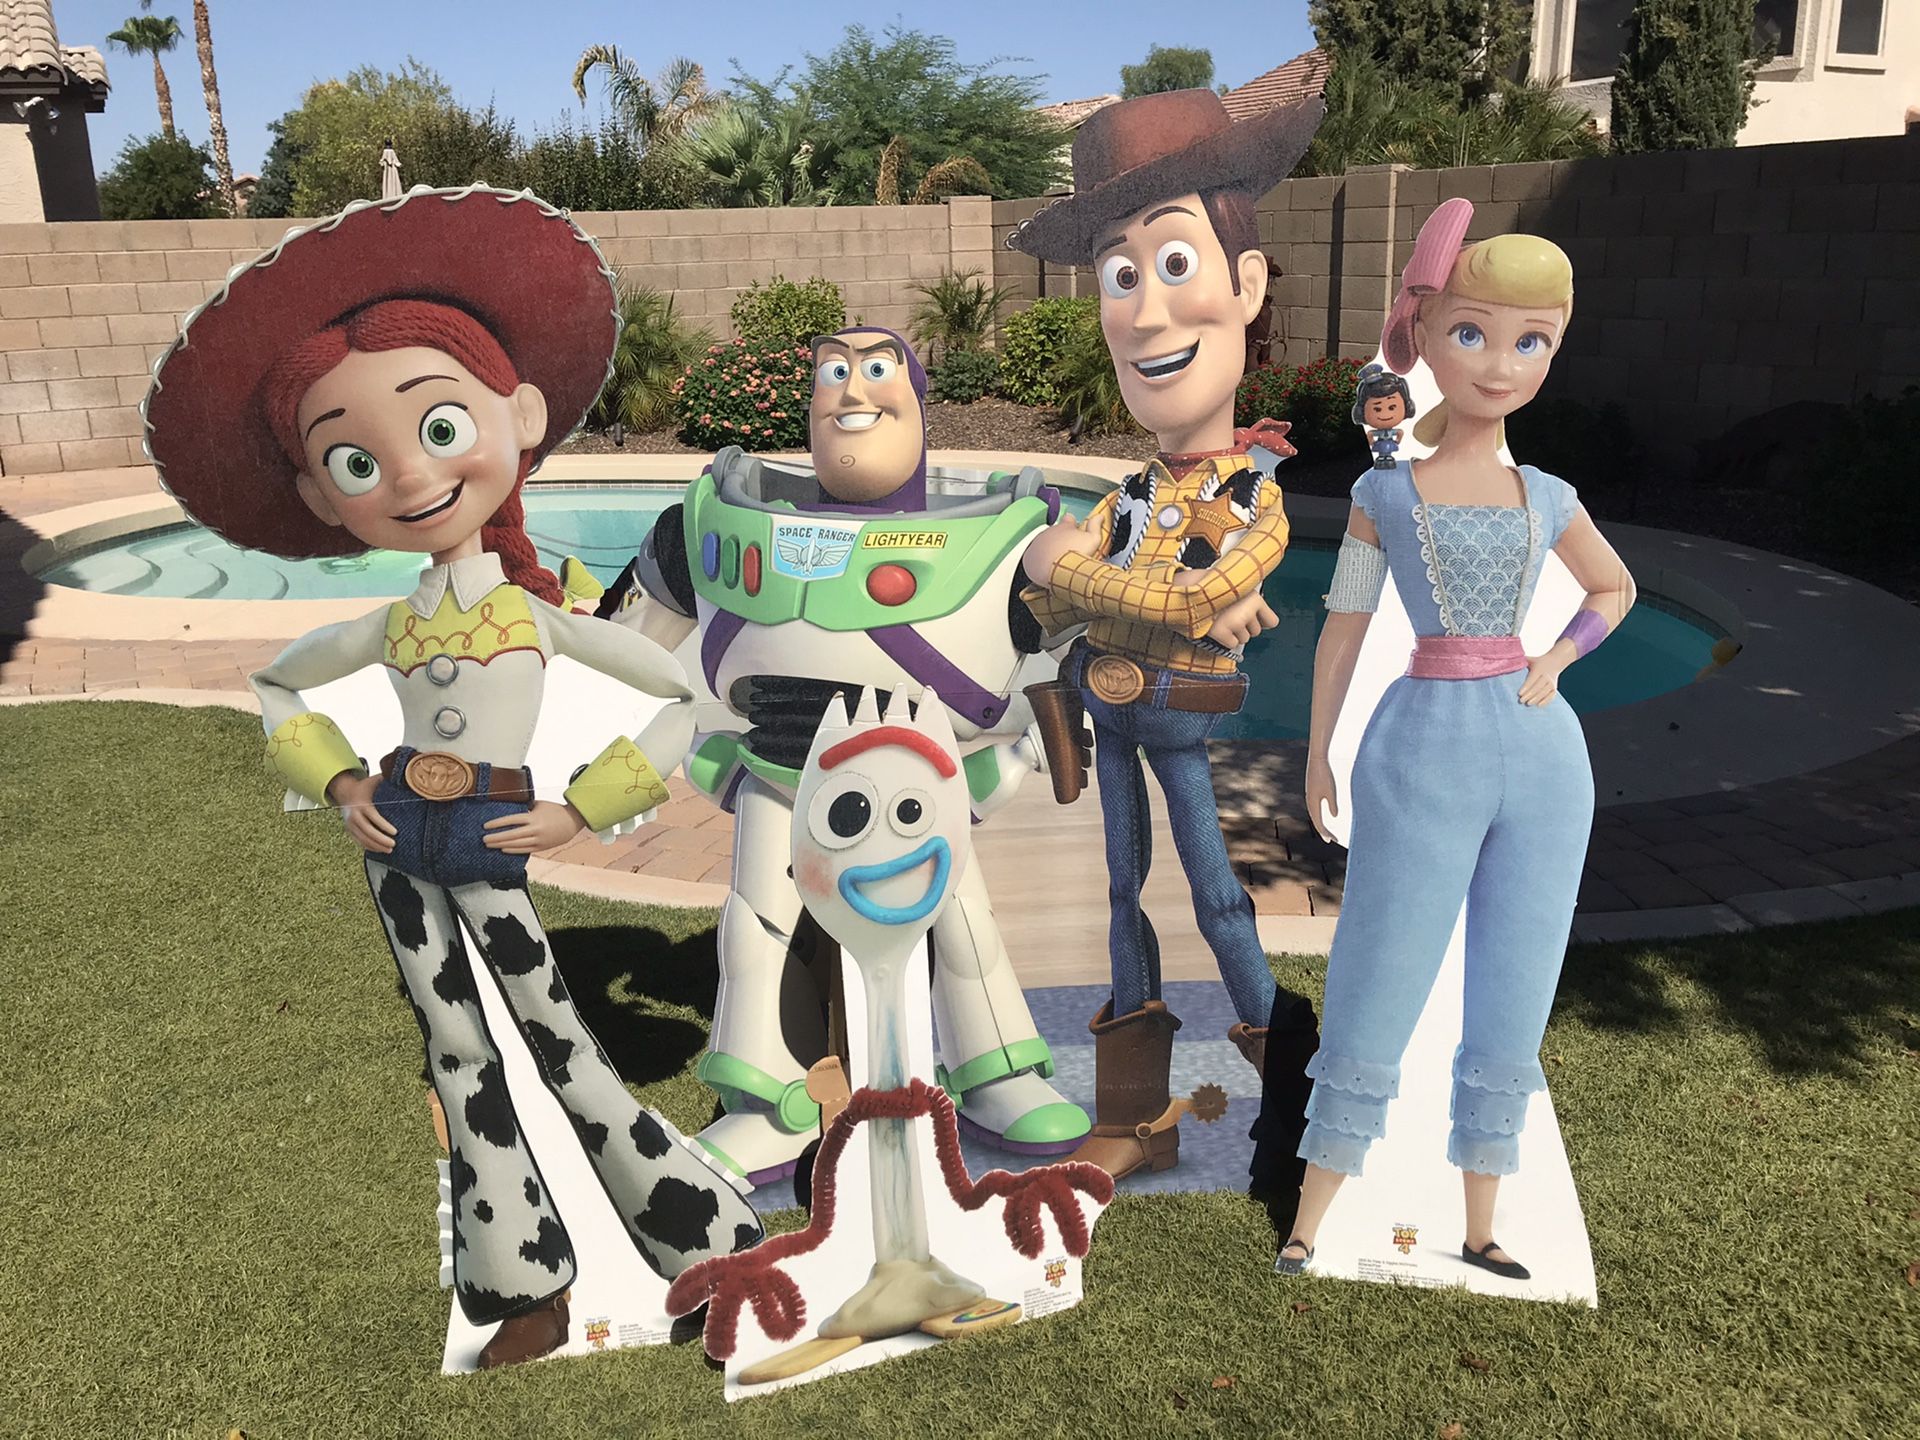 Four Official Disney Toy Story 4 Movie Theater Standup Displays